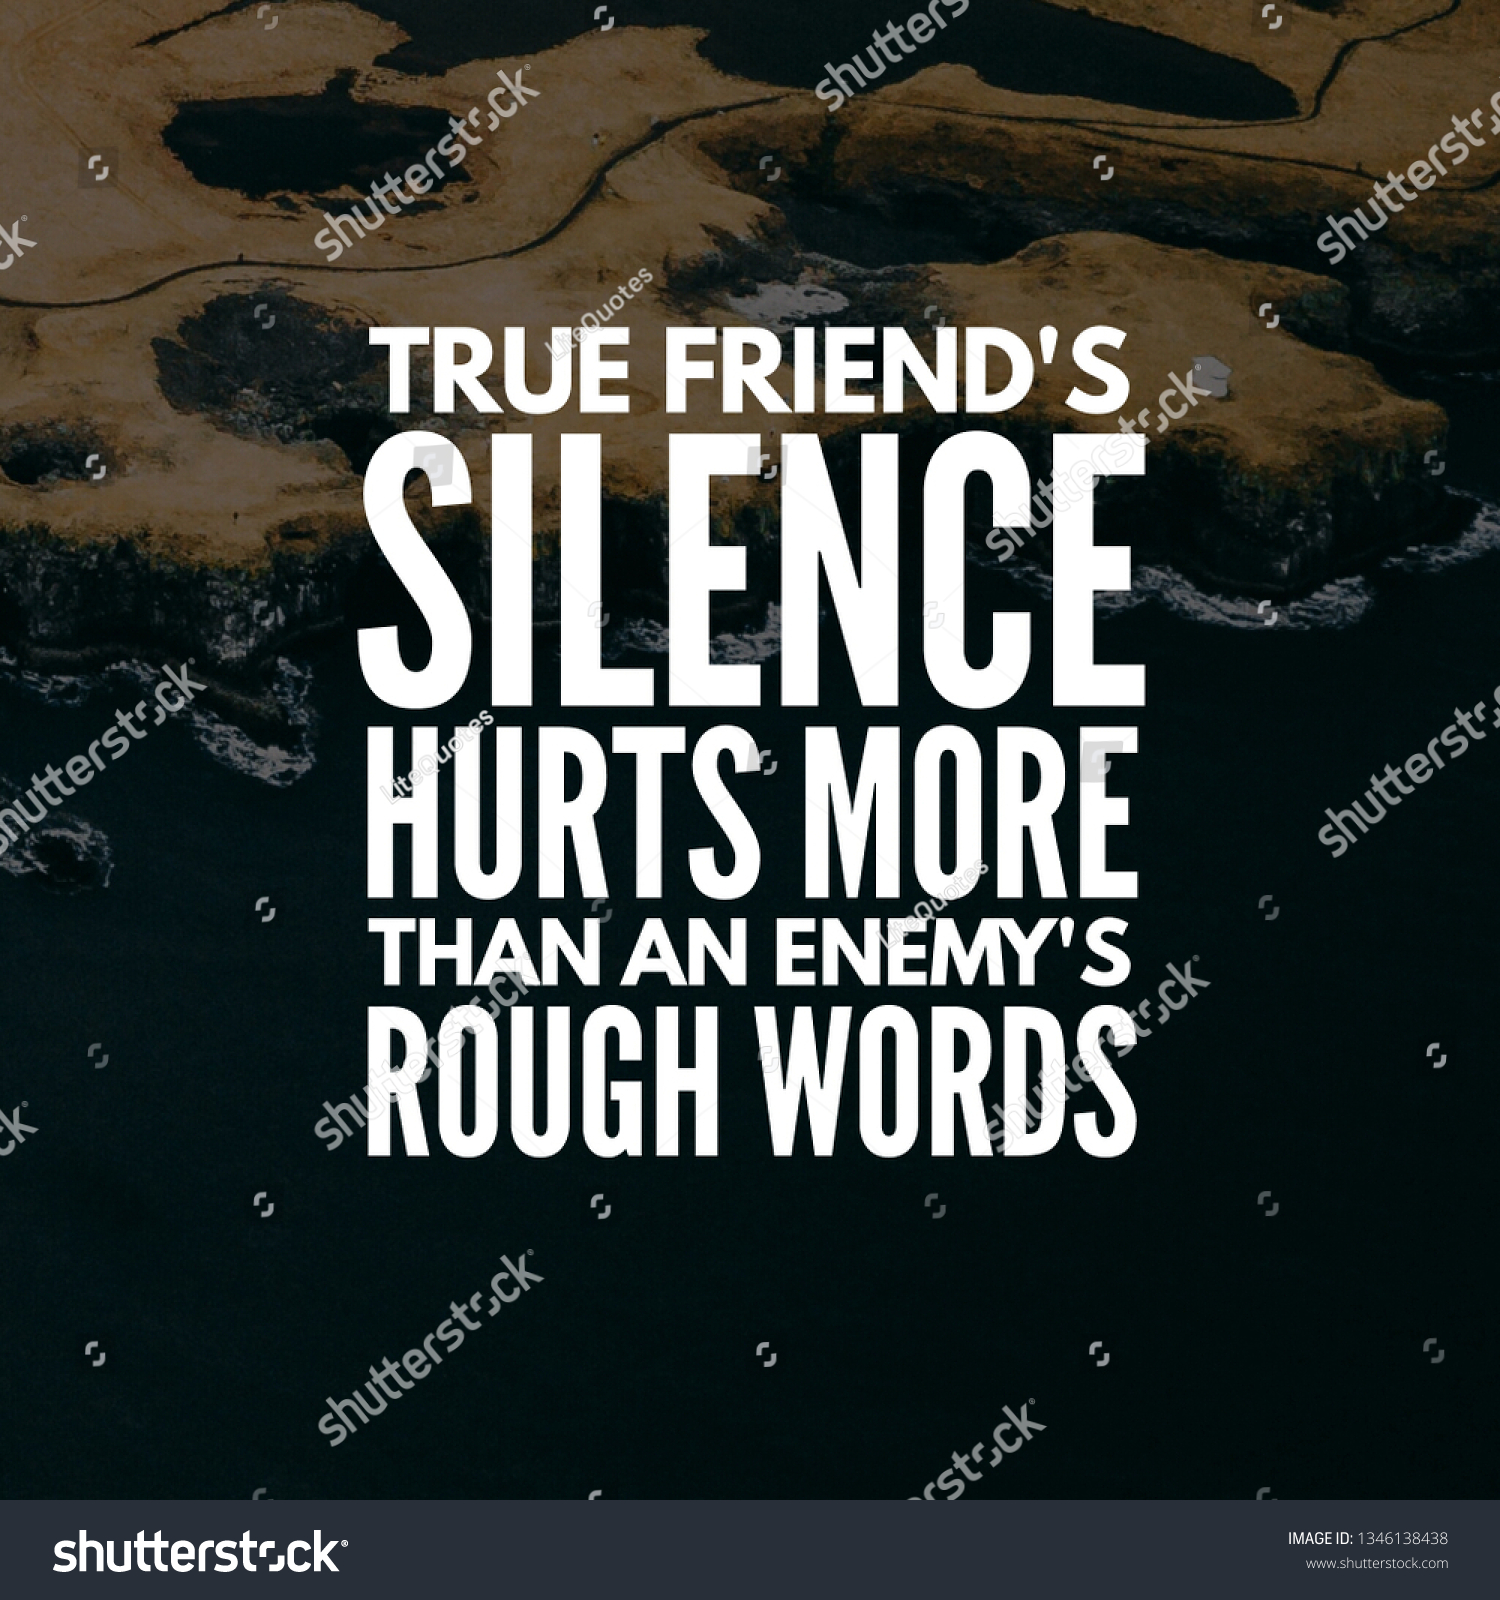 Happy Friendship Day, Quotes For Friendship Day, Friendship Quotes, Motivational Quotes On Friendship #1346138438